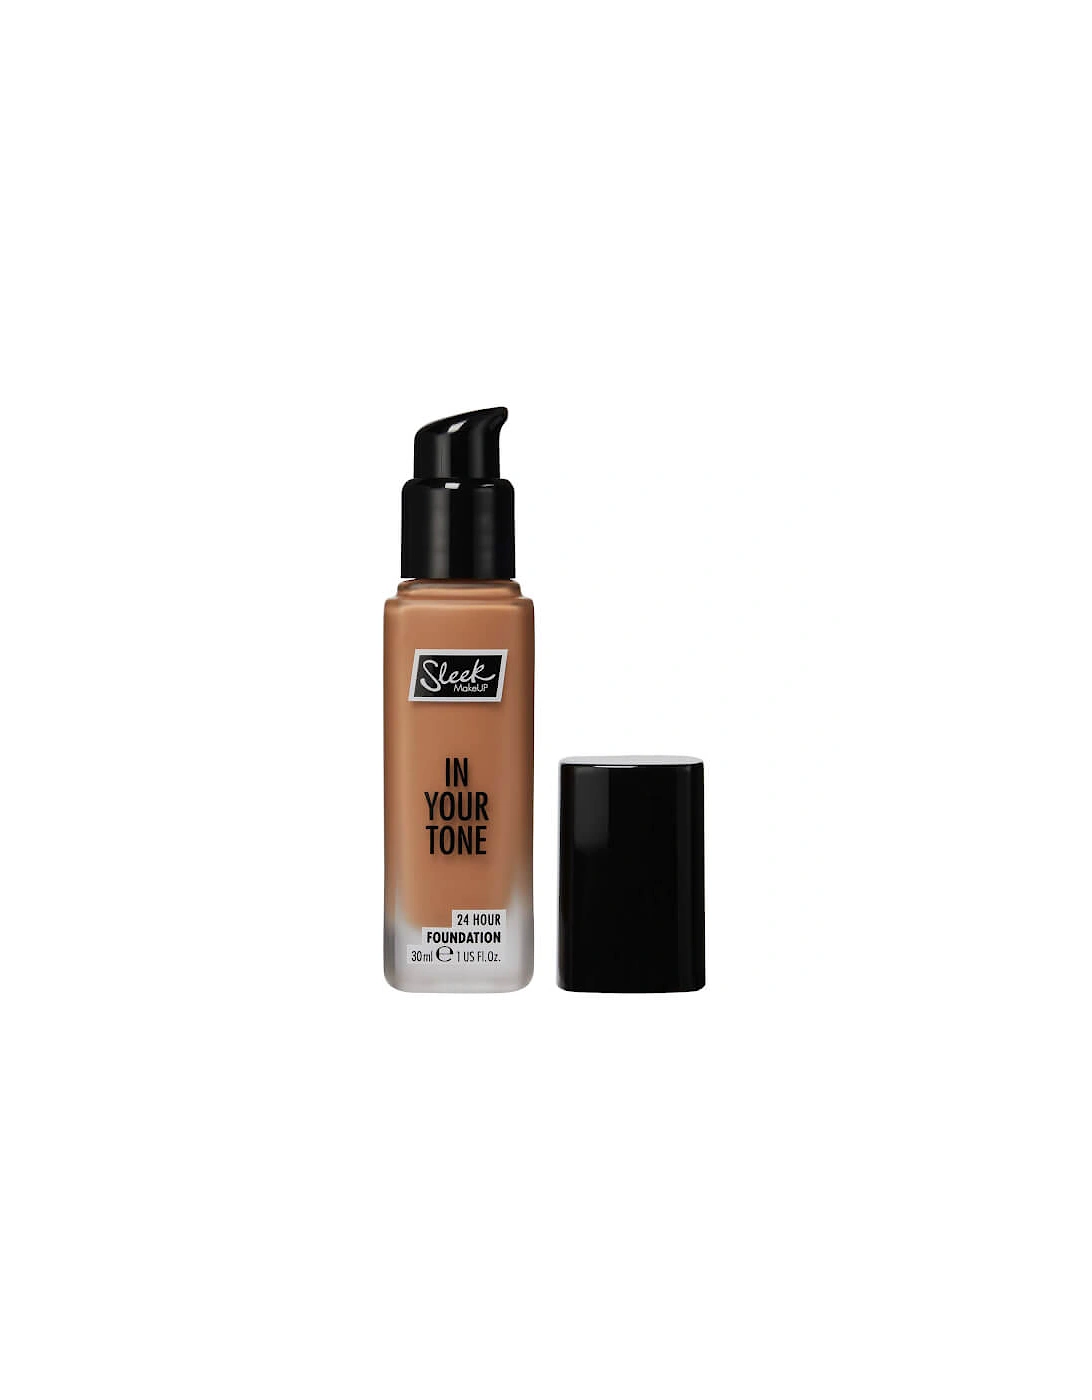 in Your Tone 24 Hour Foundation - 8C, 2 of 1